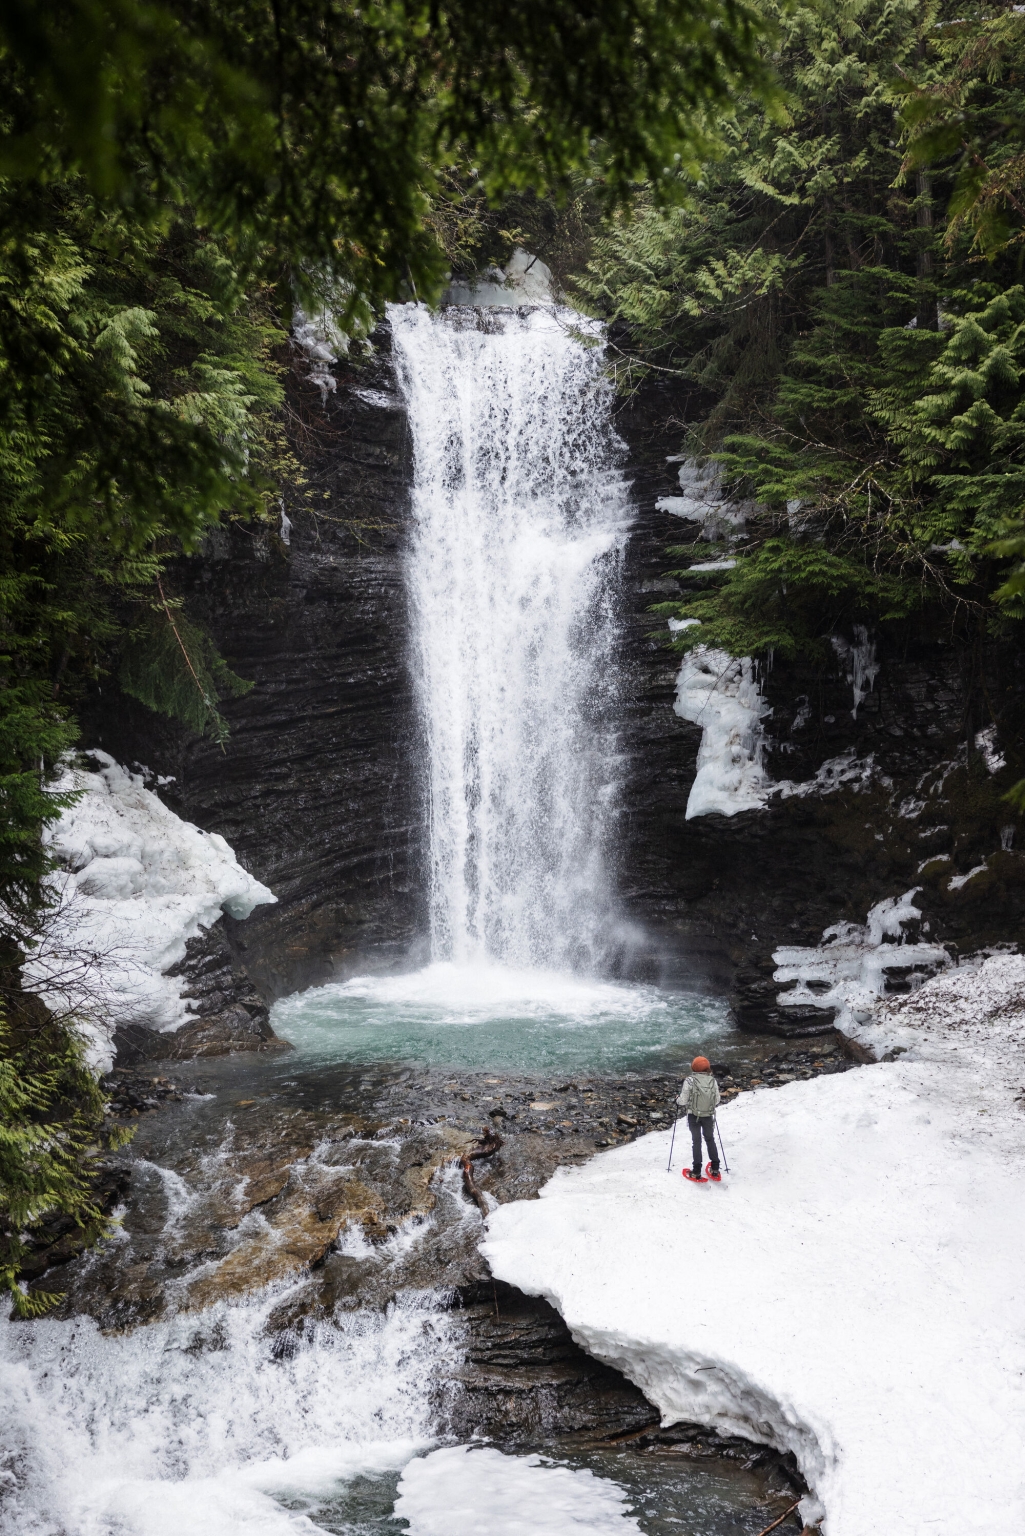 A person stands on the snowy banks of a body of water as a short waterfall plummets into a pool.